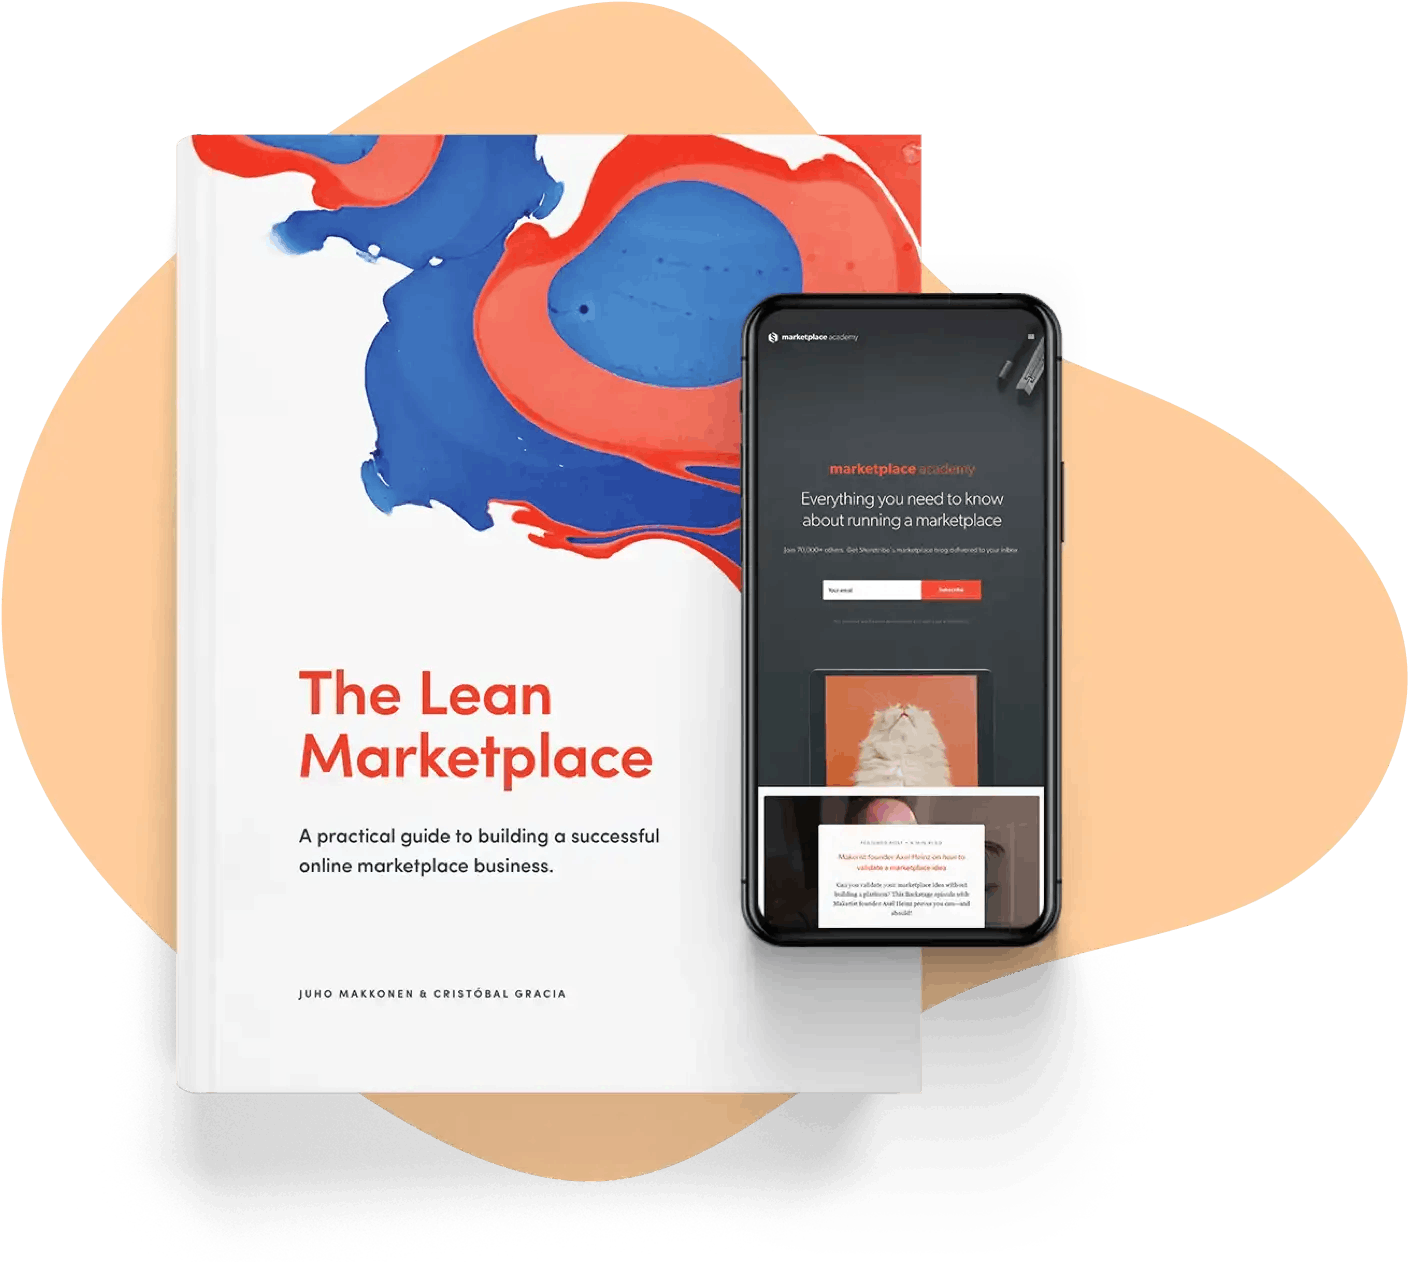 The Lean Marketplace book cover and a smartphone screen showing the Marketplace Academy home page.